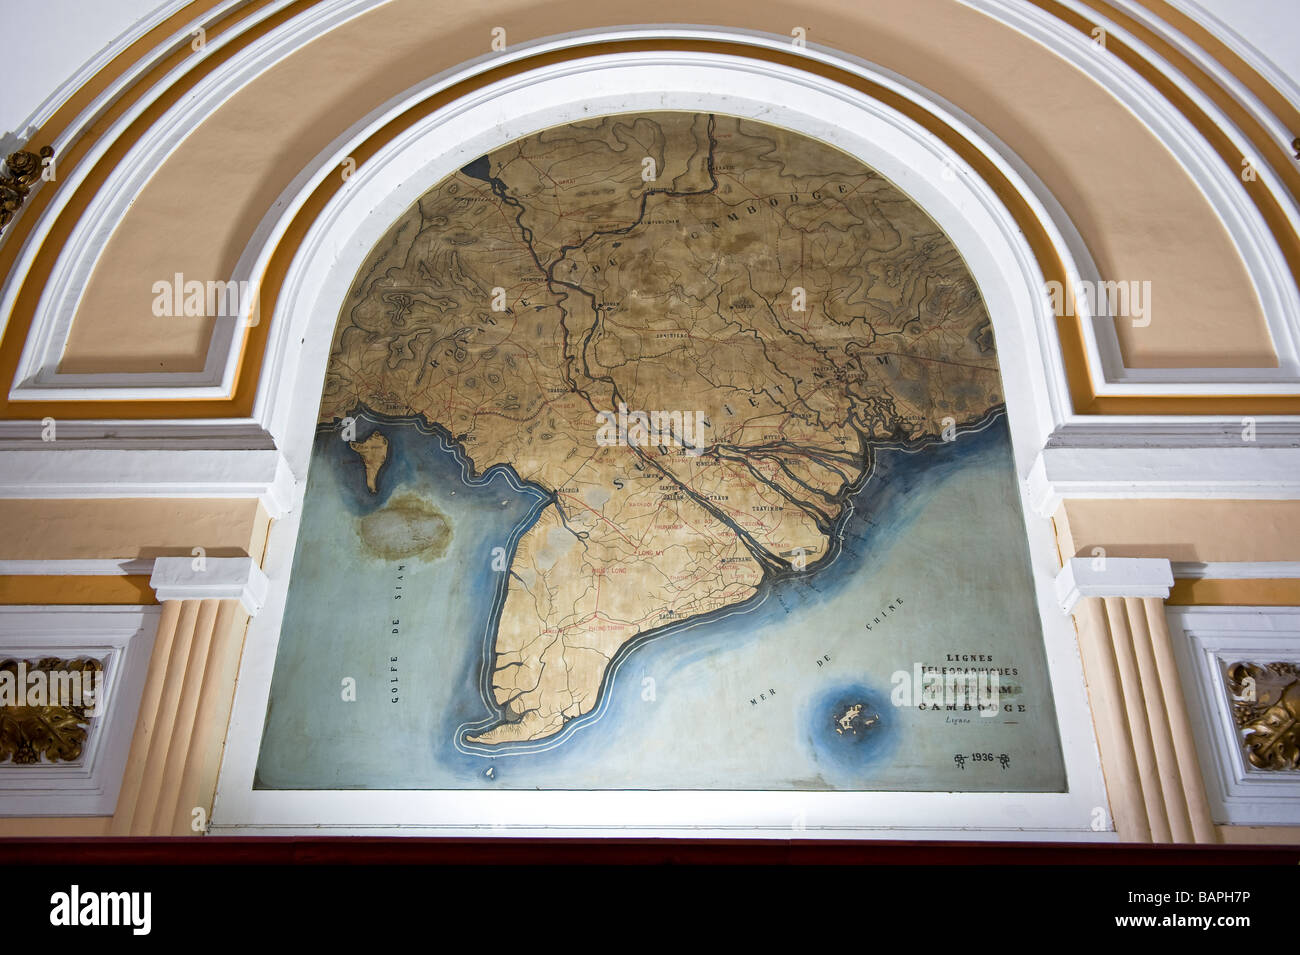 Old map of Vietnam or French Indochina inside Ho Chi Minh City Central Post Office, Vietnam. Stock Photo